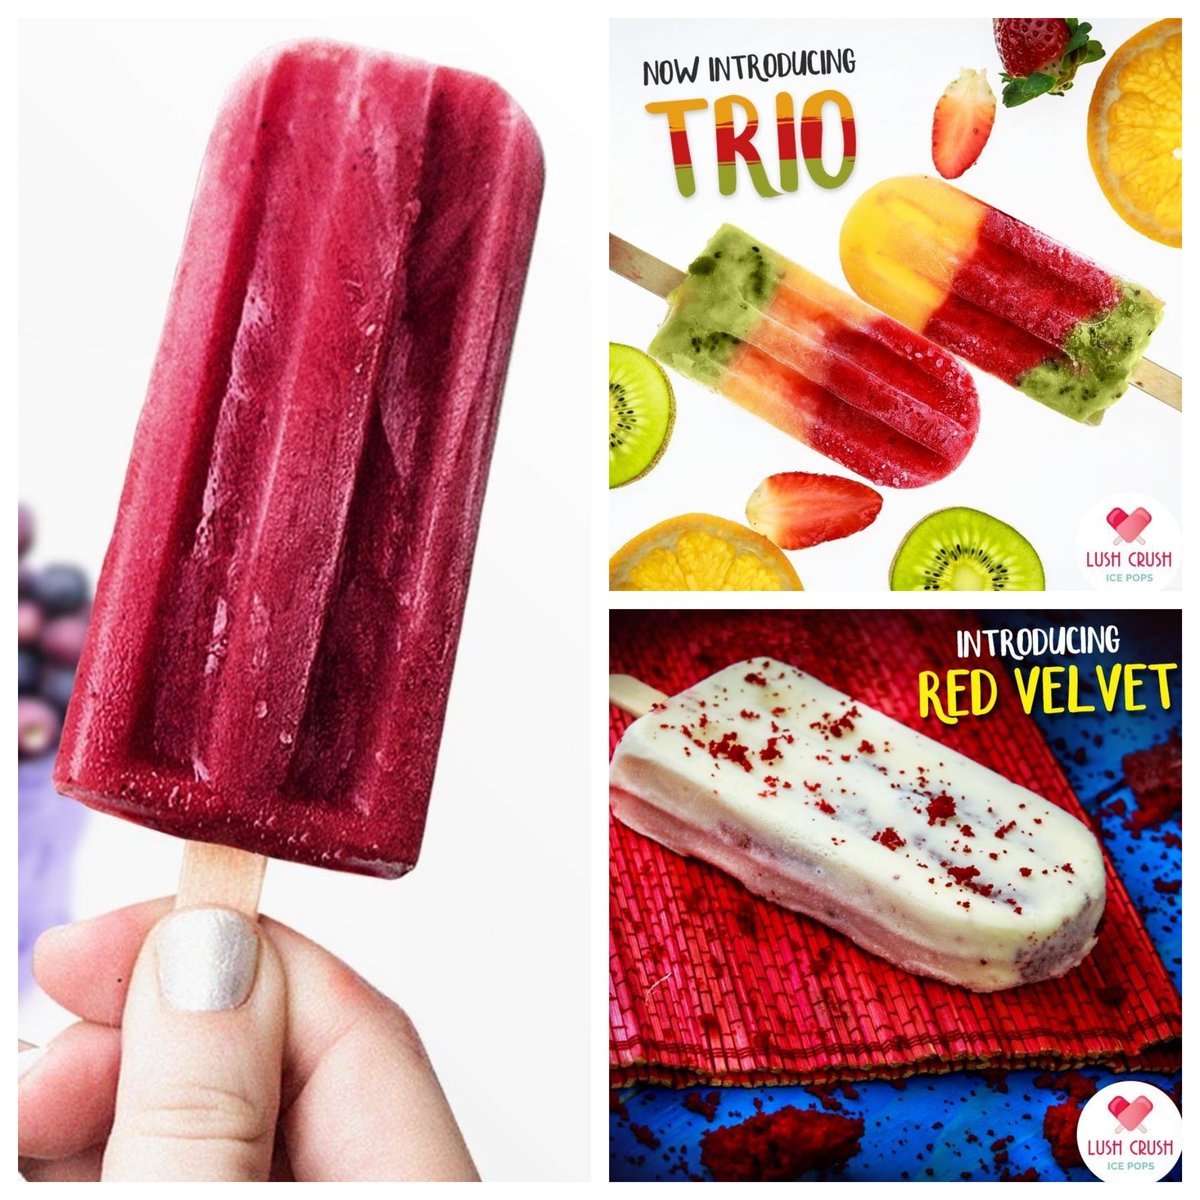 Looking for amazing icecream with a tinge of nostalgia? Lush Crush is the perfect place to provide both as it's ice pops will remind you of your childhood icecream adventures!
#peekabooguru #icecream #icepops #heatwave #karachi #desserts #icepopsicles  #LushCrush  #beattheheat